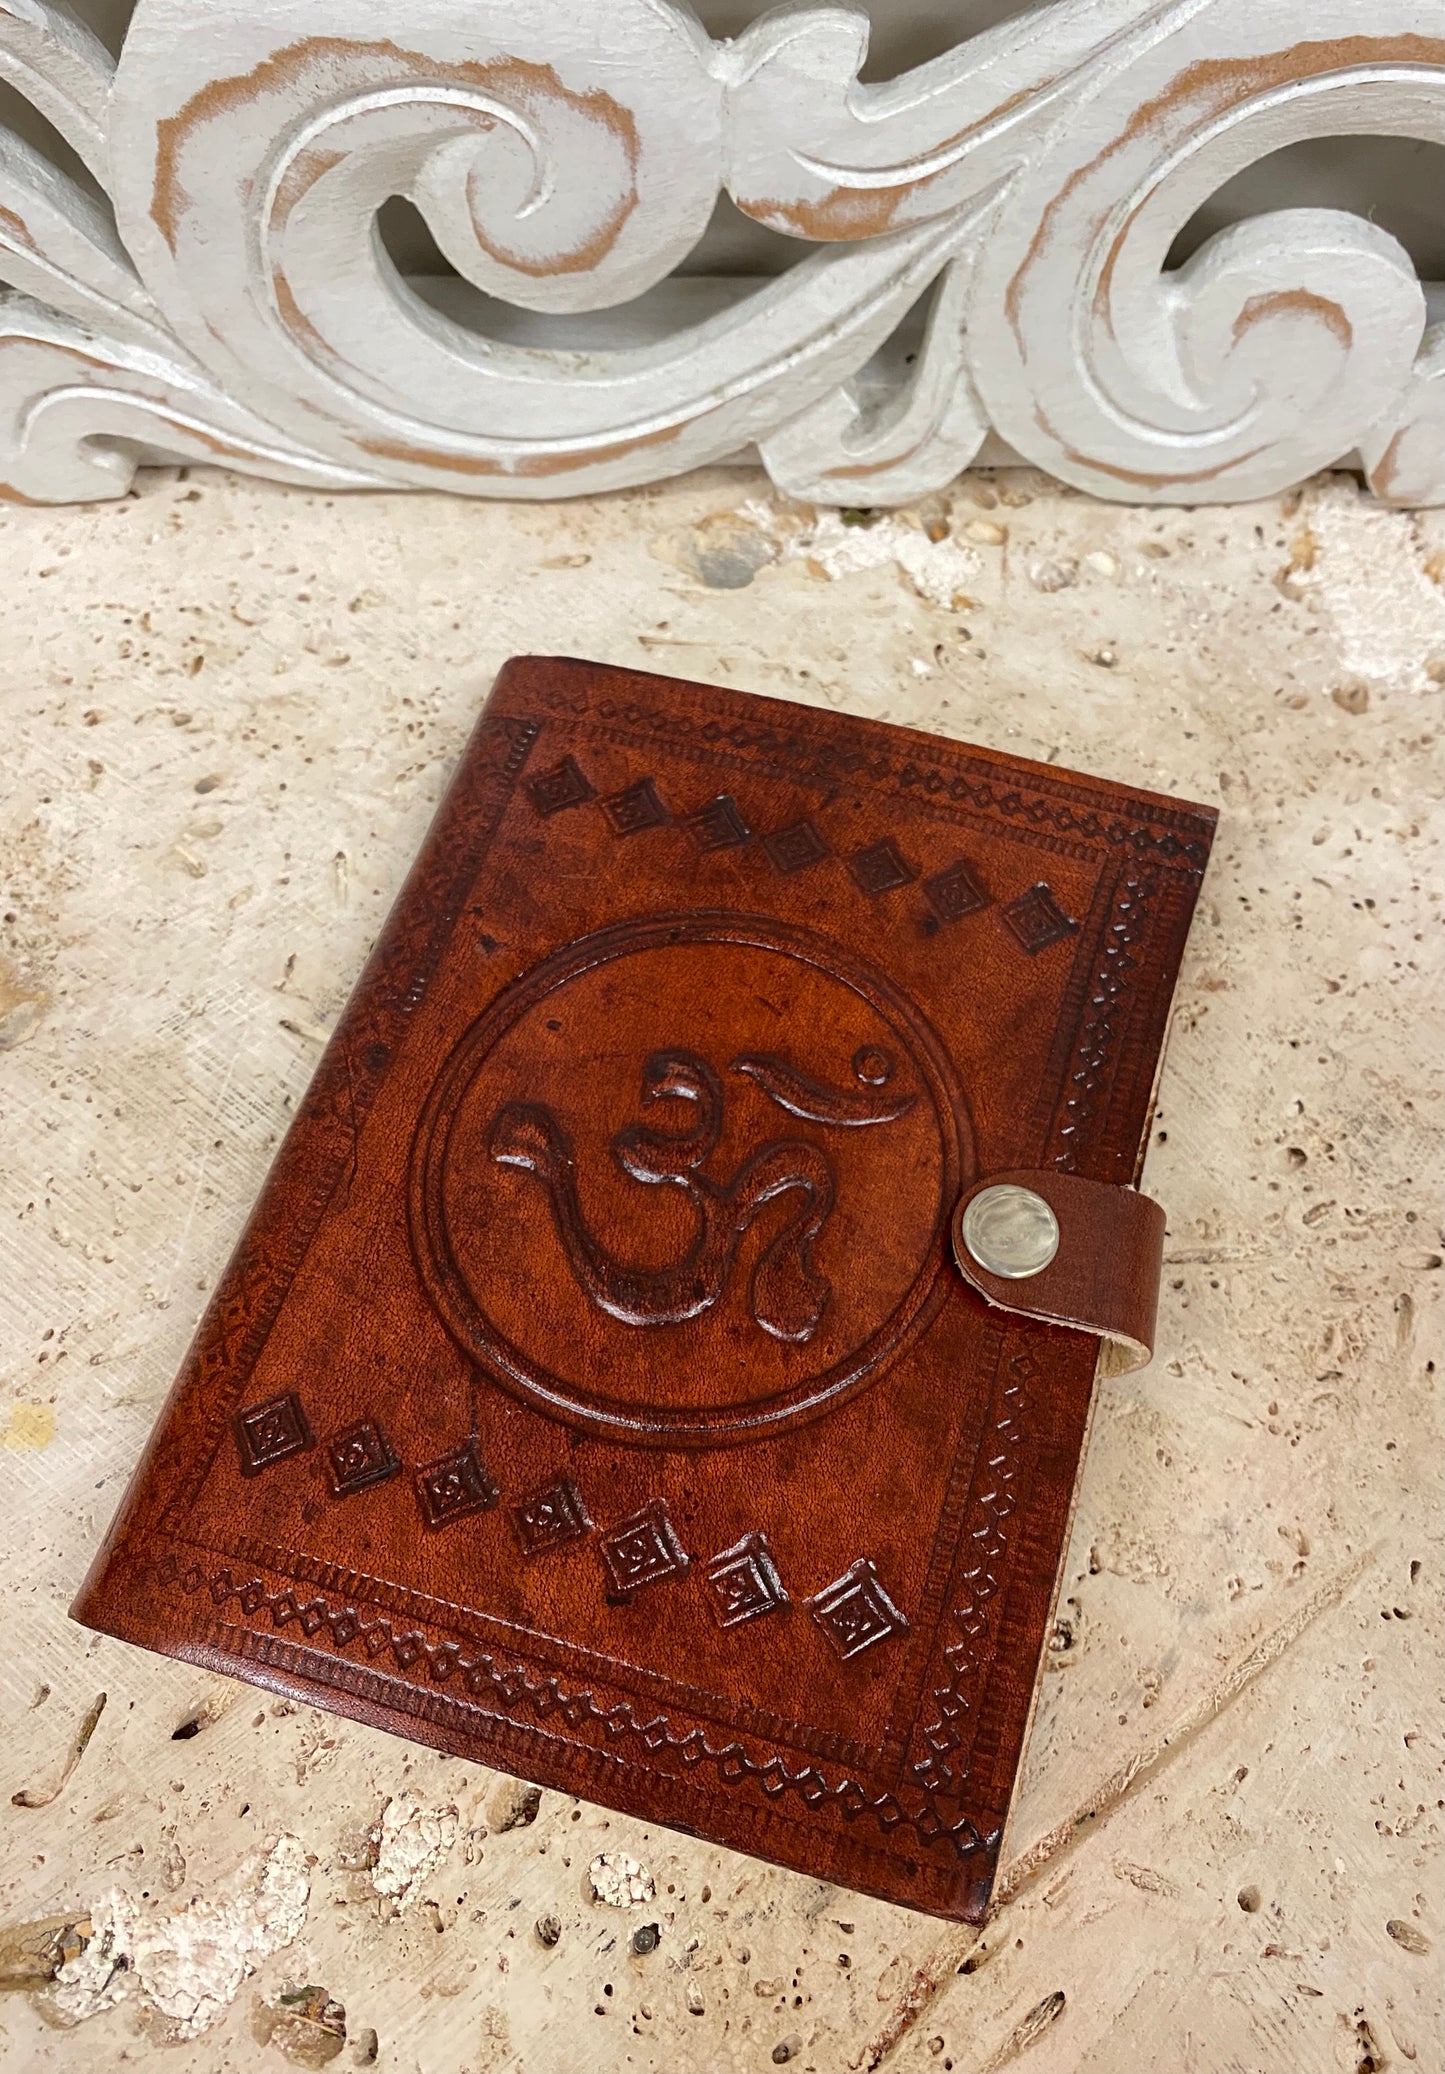 Hand Embossed Camel leather Journal with button close - Available in 7 Designs 4.5" x 6